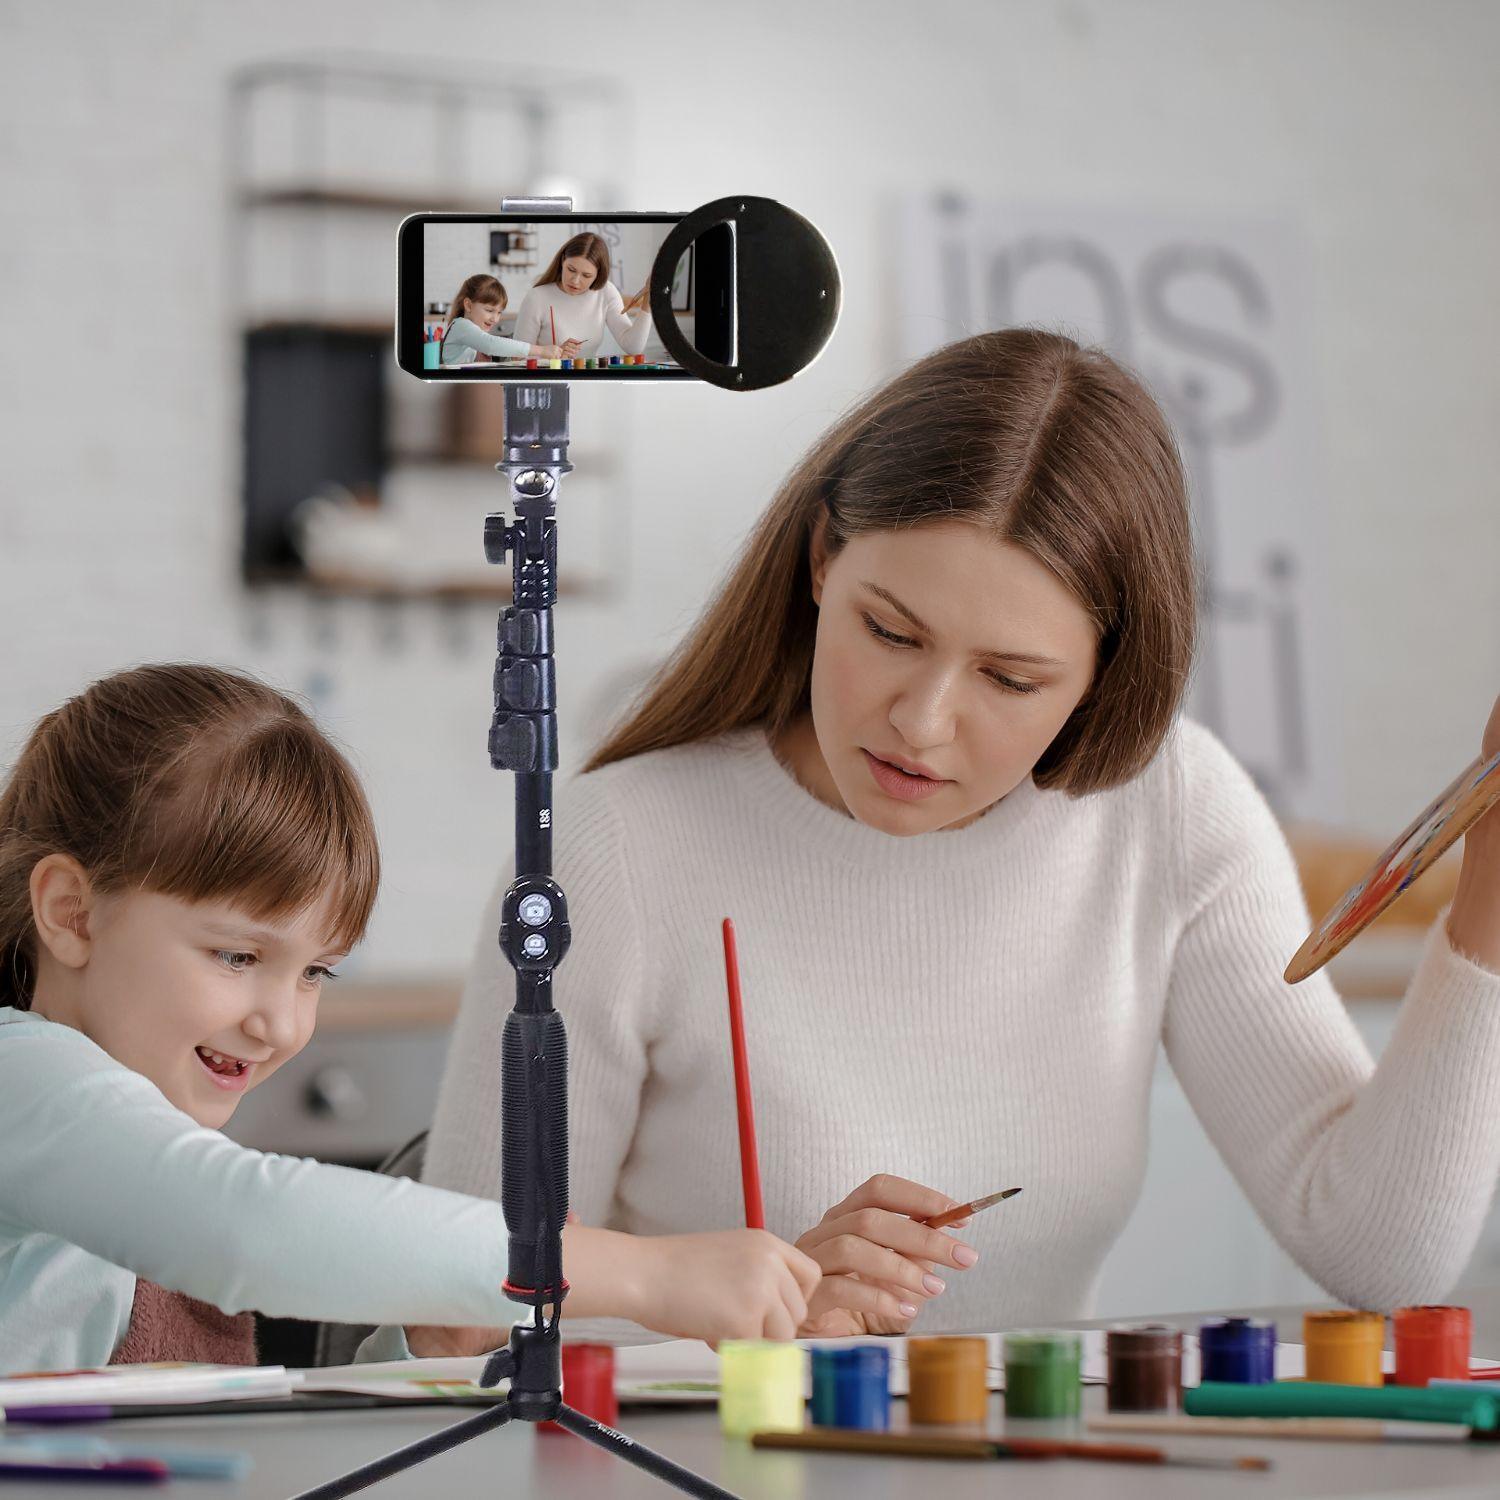 Mother and daughter filming their bonding moment using SOCIALITE Selfie Stick tripod 